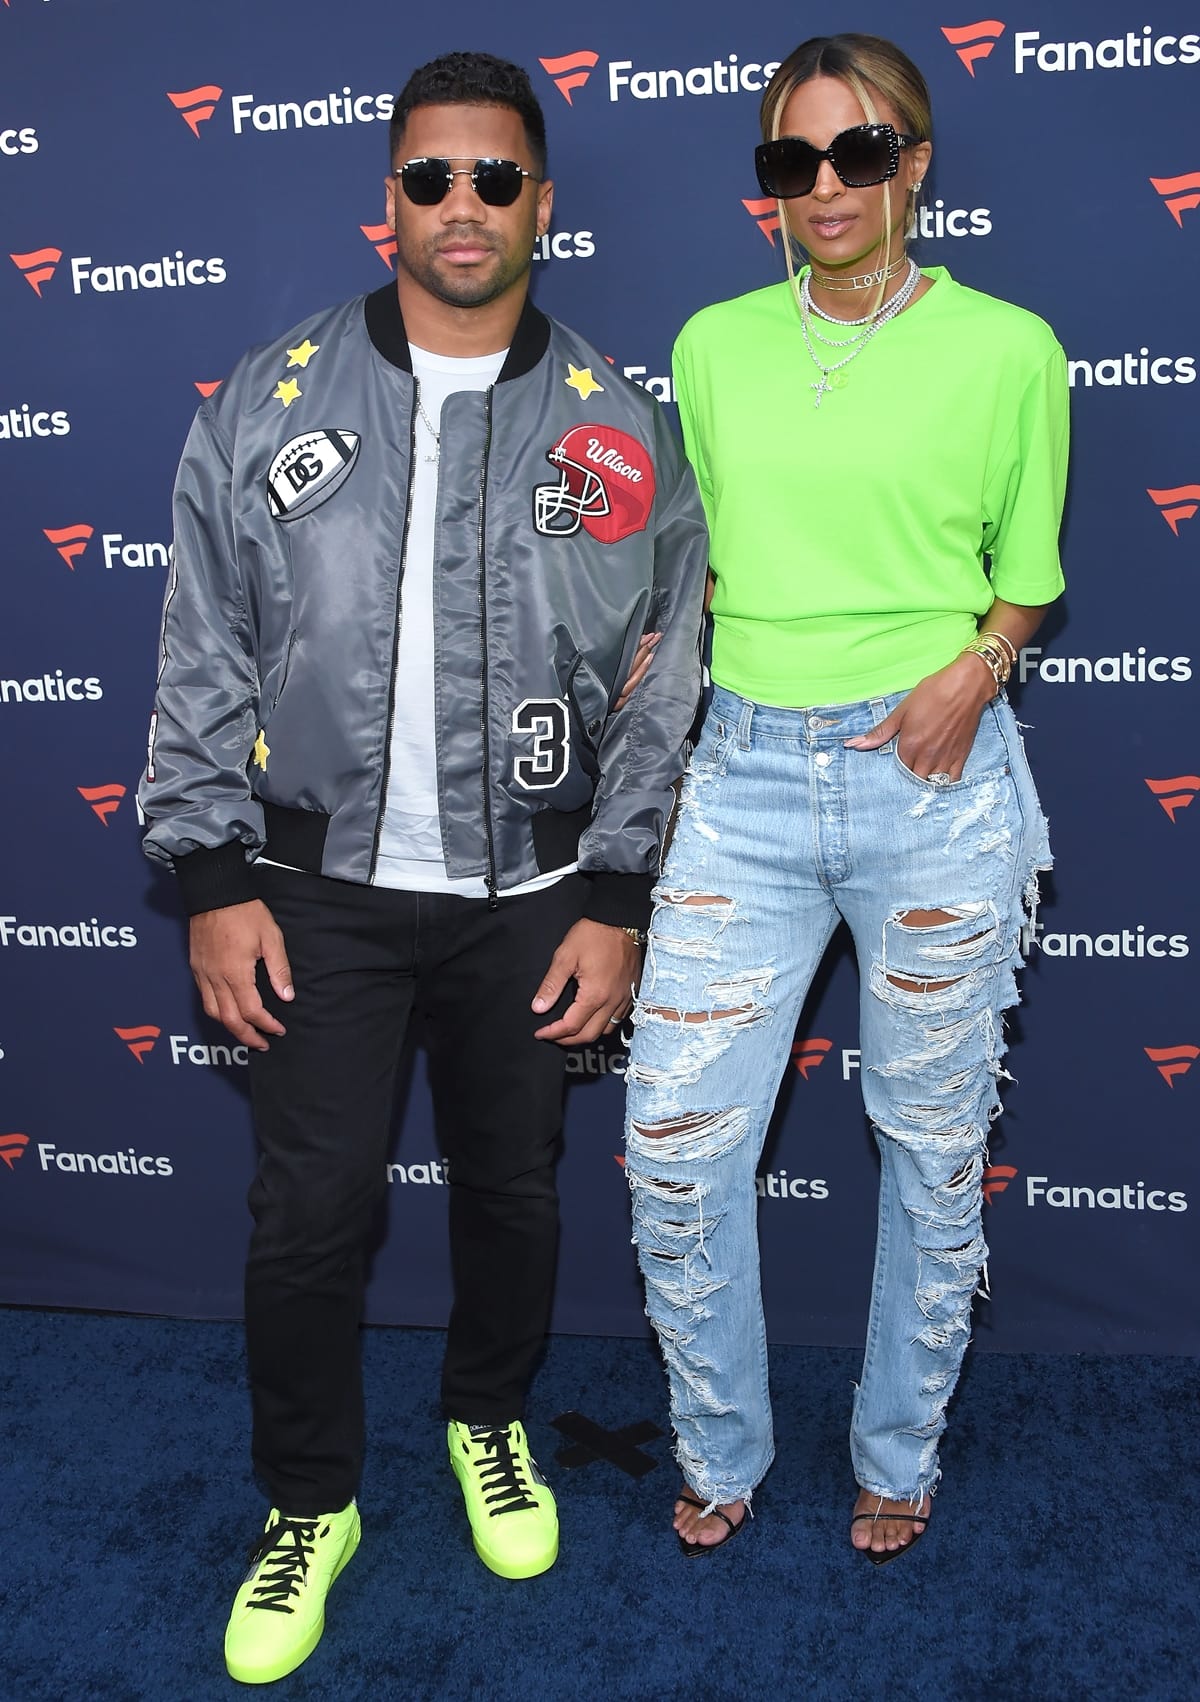 Ciara is shorter than her husband, Russell Wilson, but she can match or surpass his height when wearing high heels